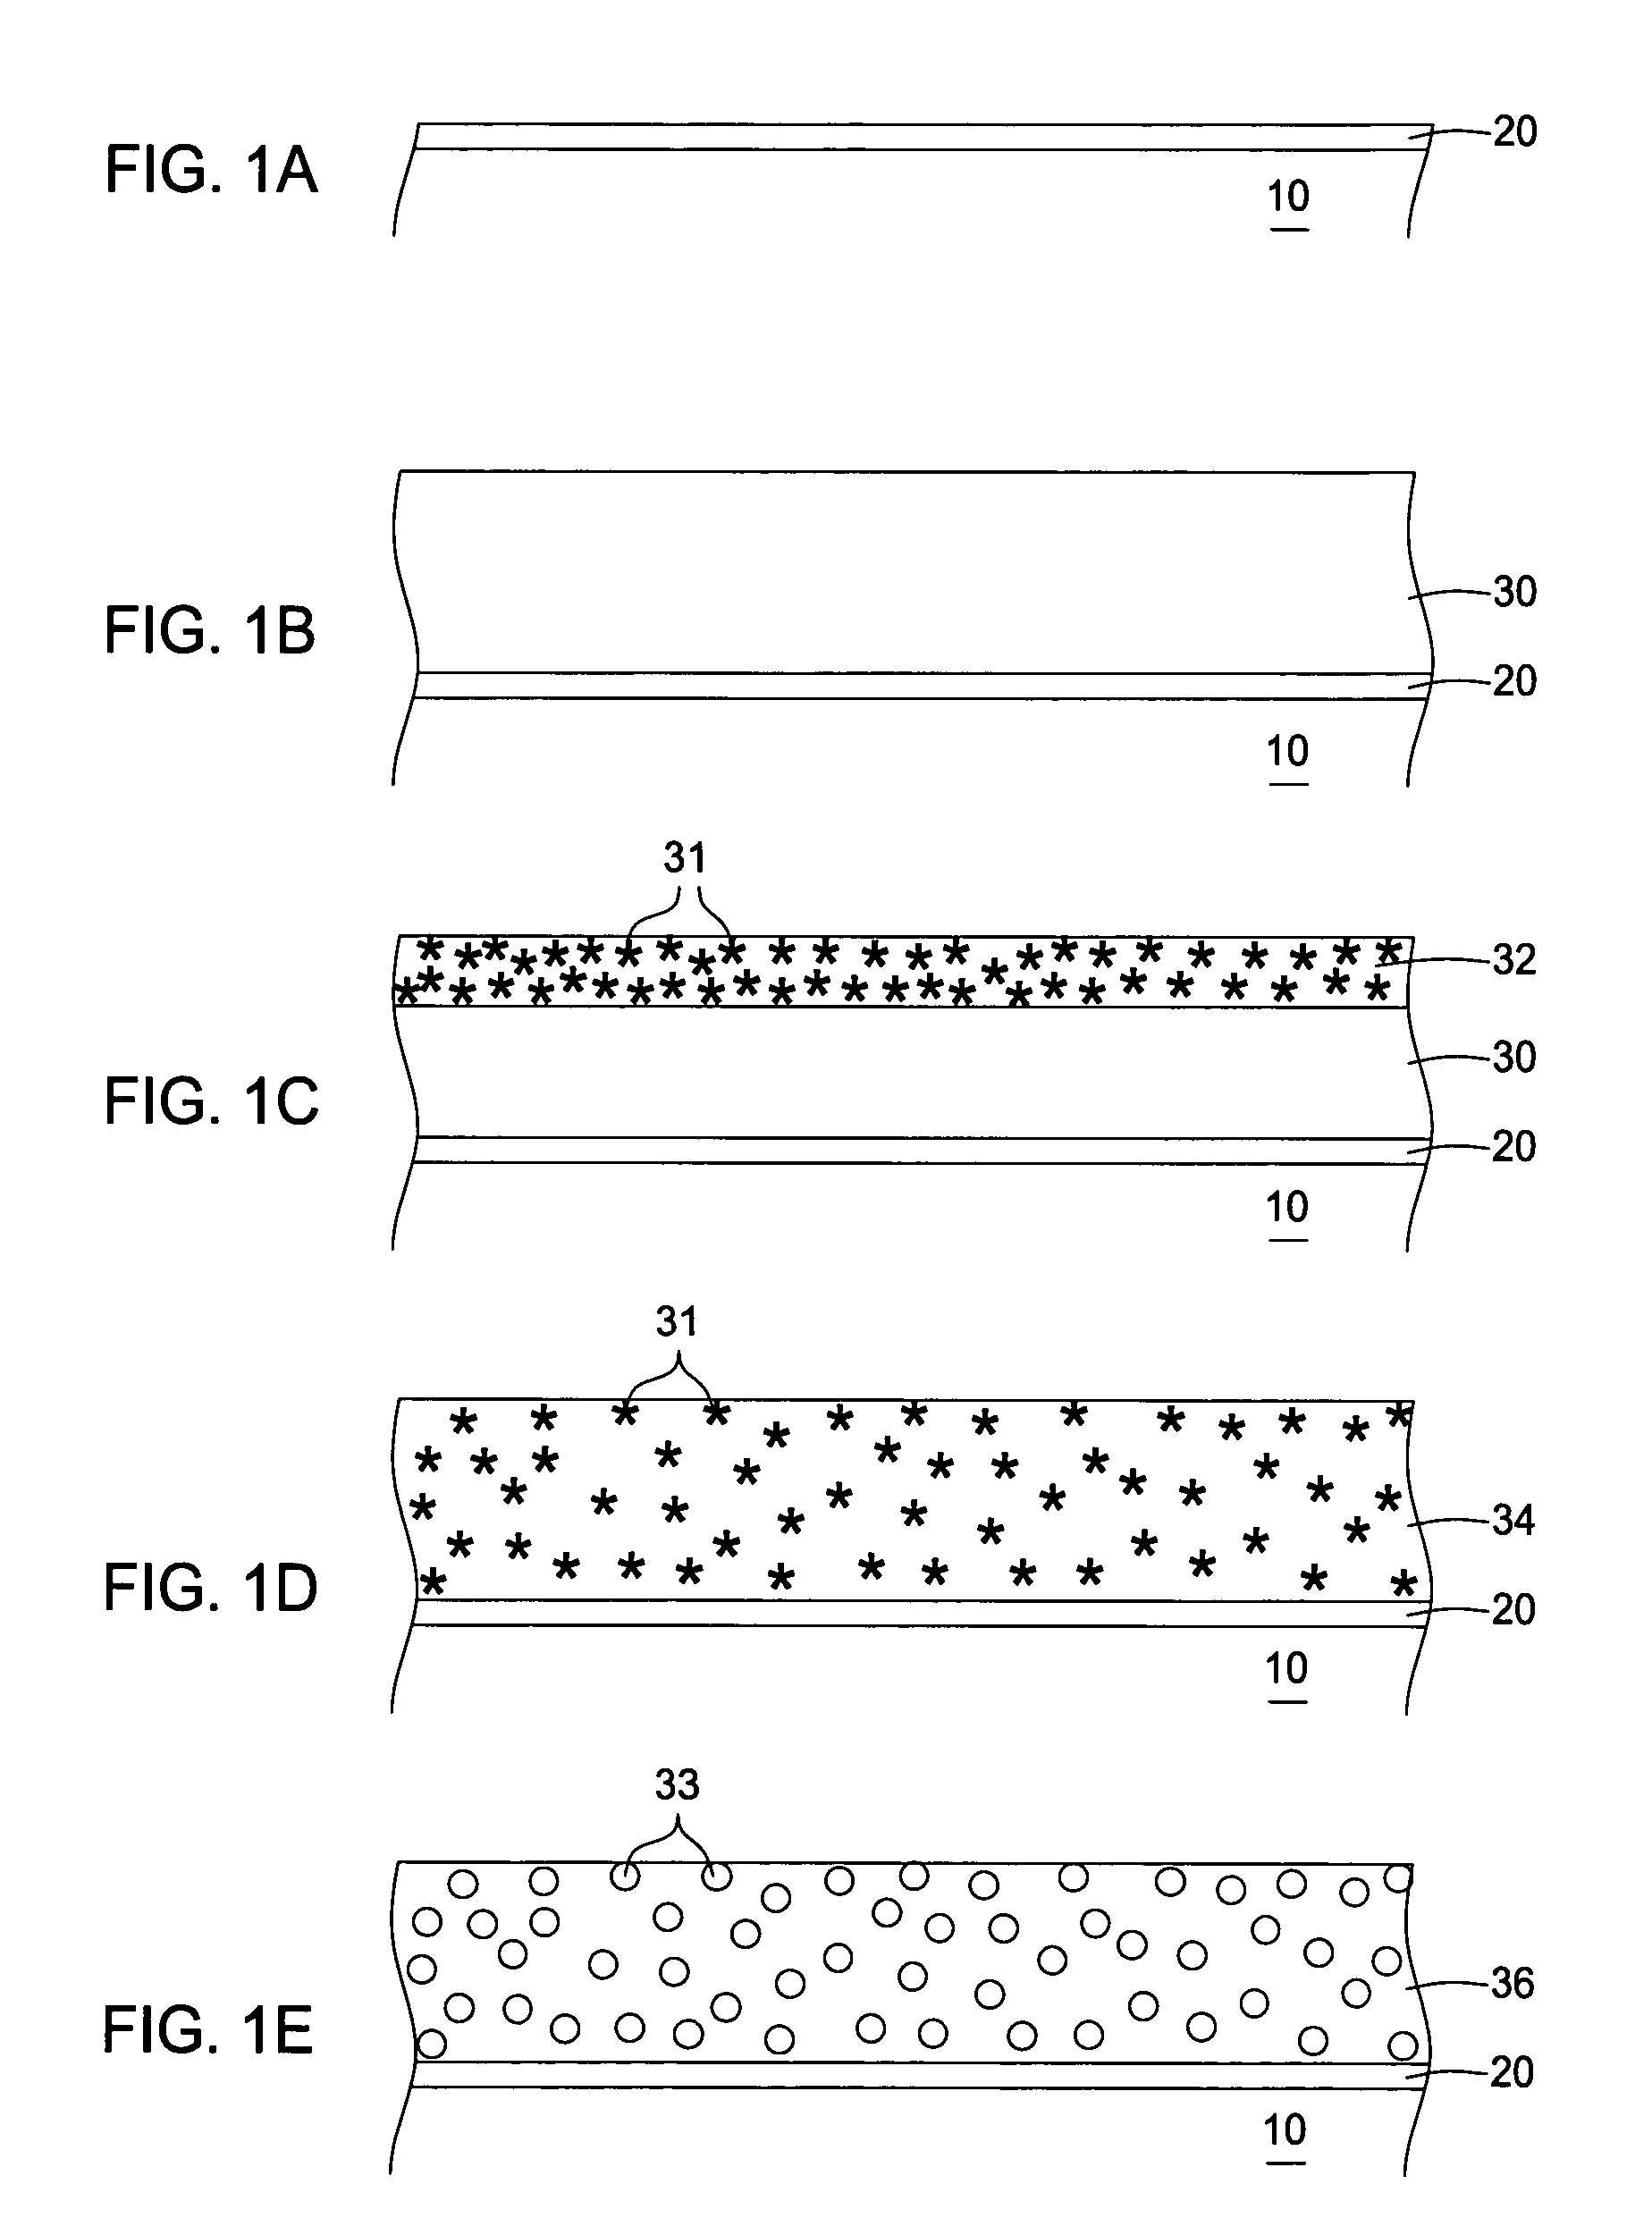 Gate electrode dopant activation method for semiconductor manufacturing including a laser anneal